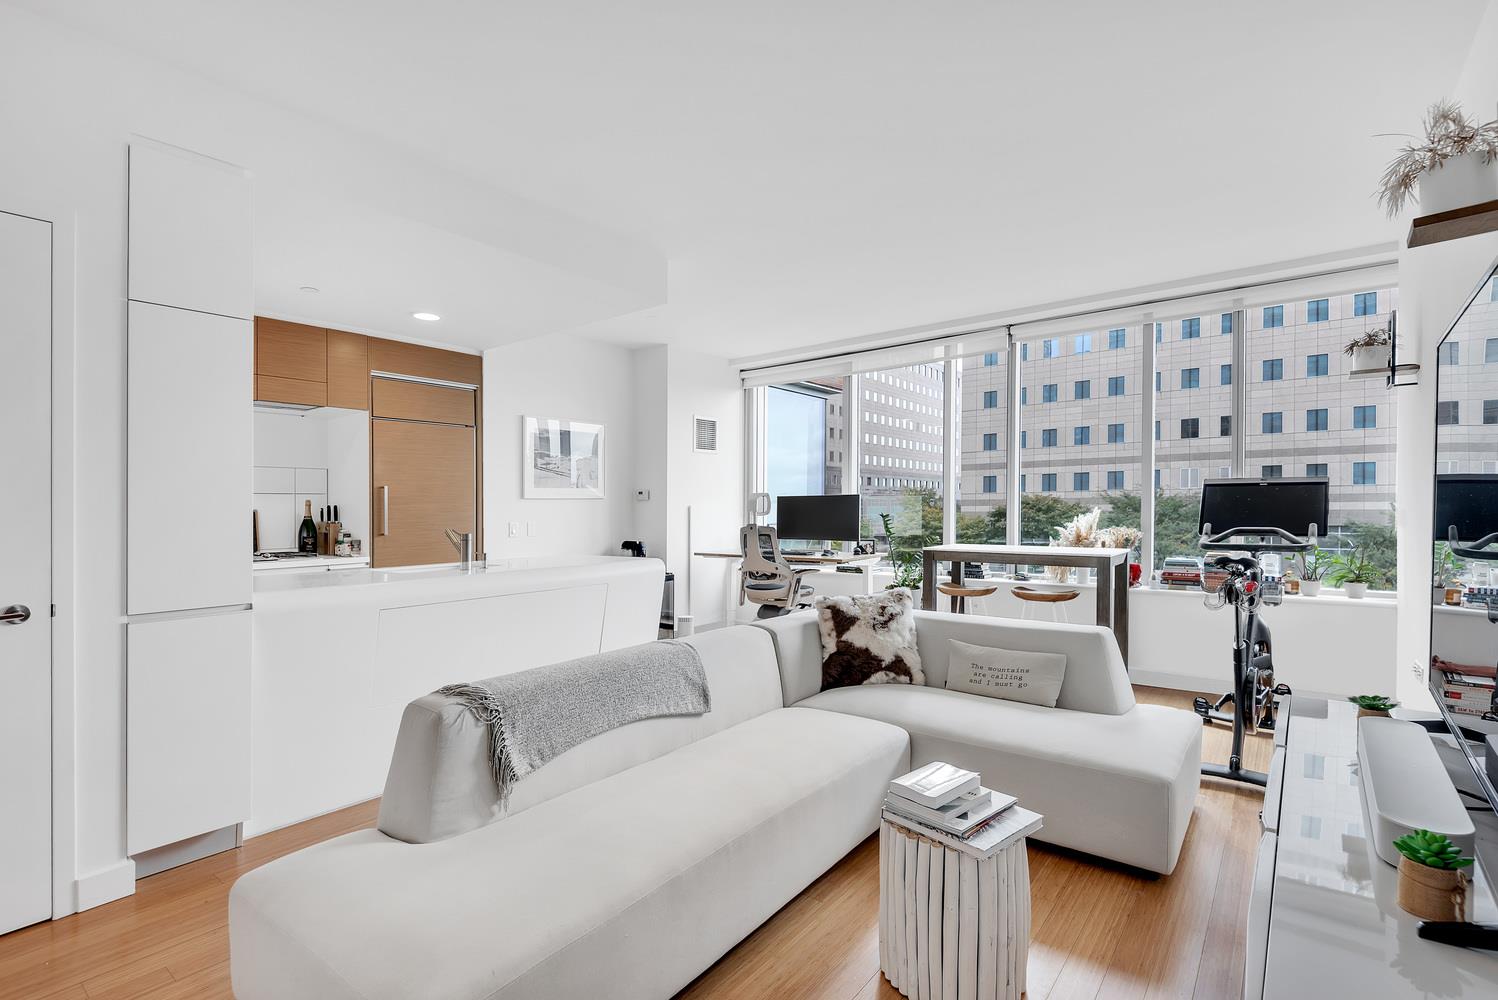 2 River Terrace 3F, Battery Park City, Downtown, NYC - 1 Bedrooms  
1.5 Bathrooms  
2 Rooms - 